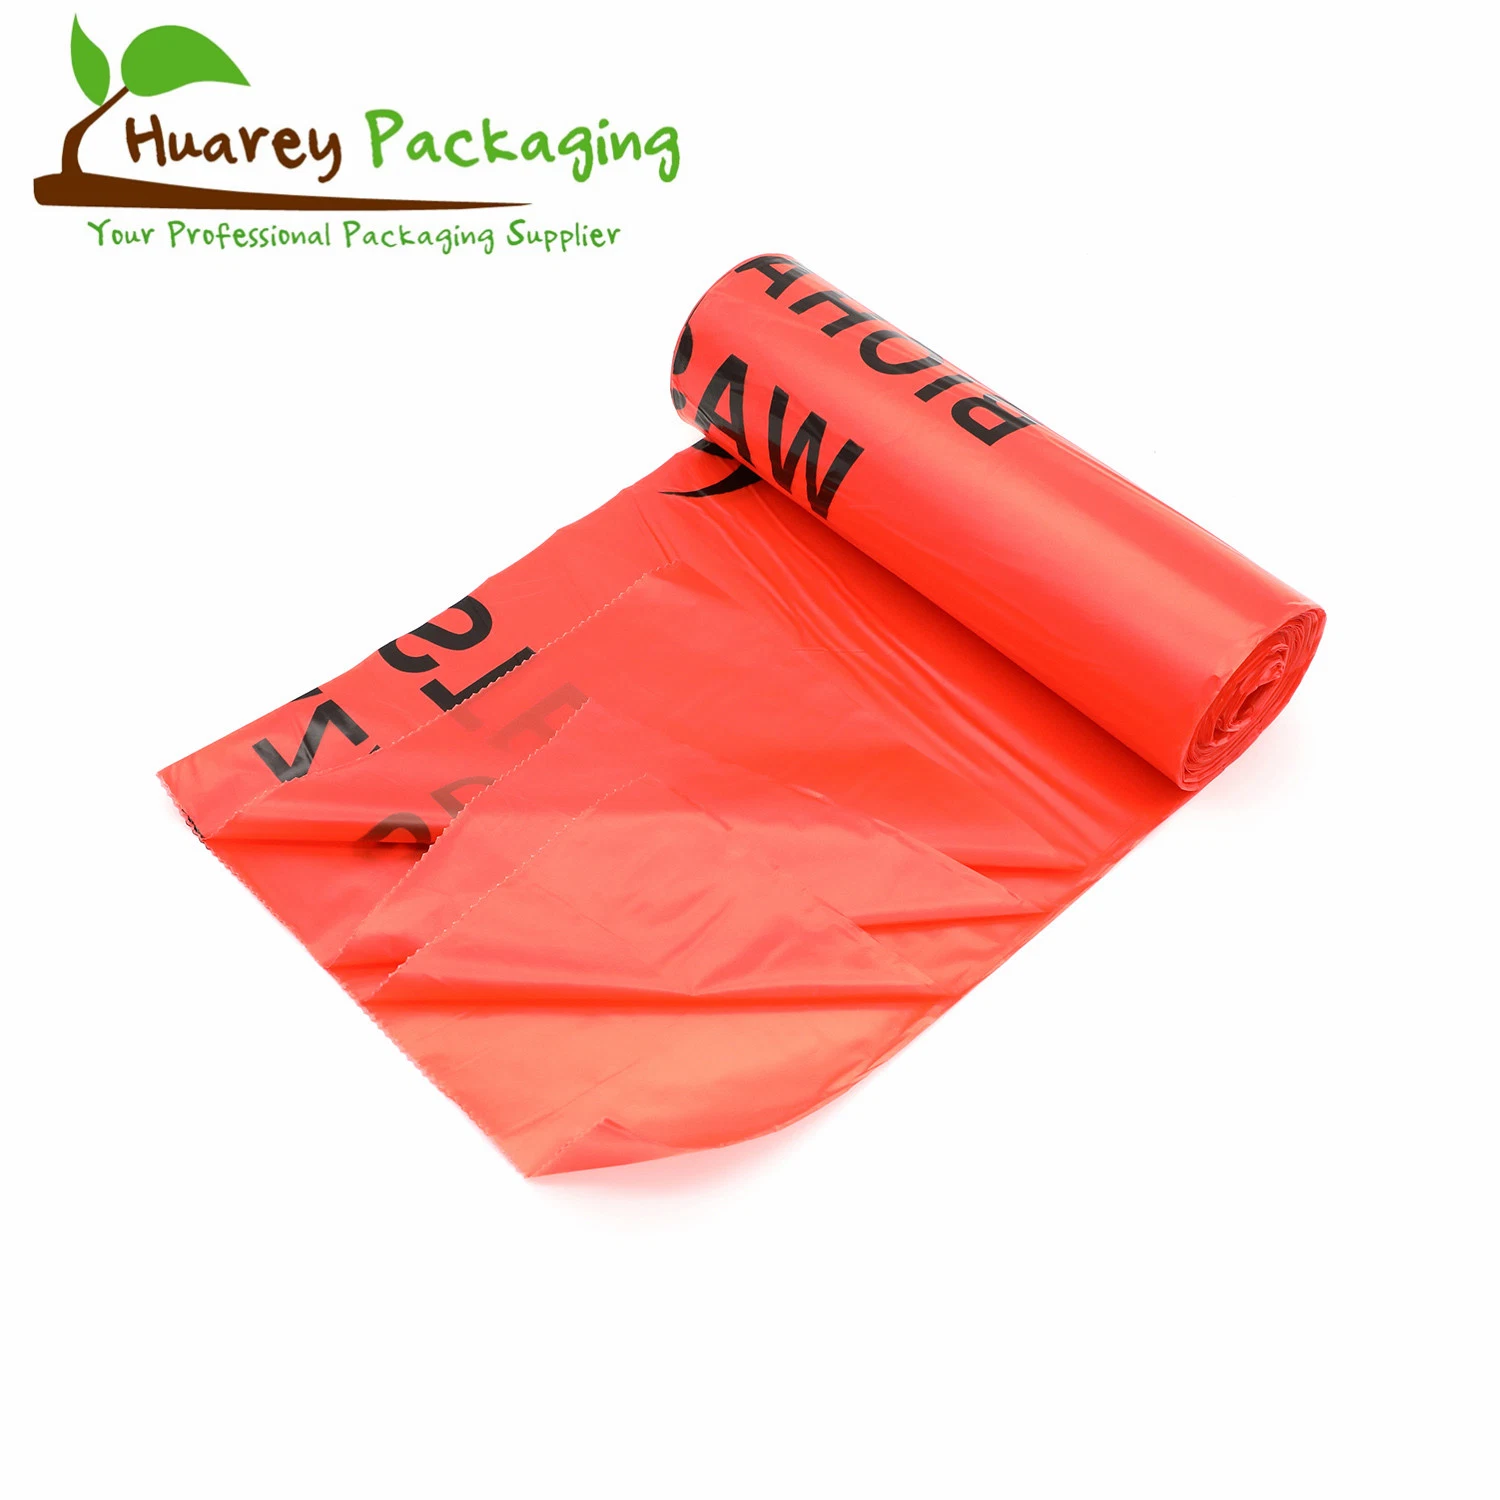 HDPE/LDPE Water-Proof Garbage Bag for Daily Use